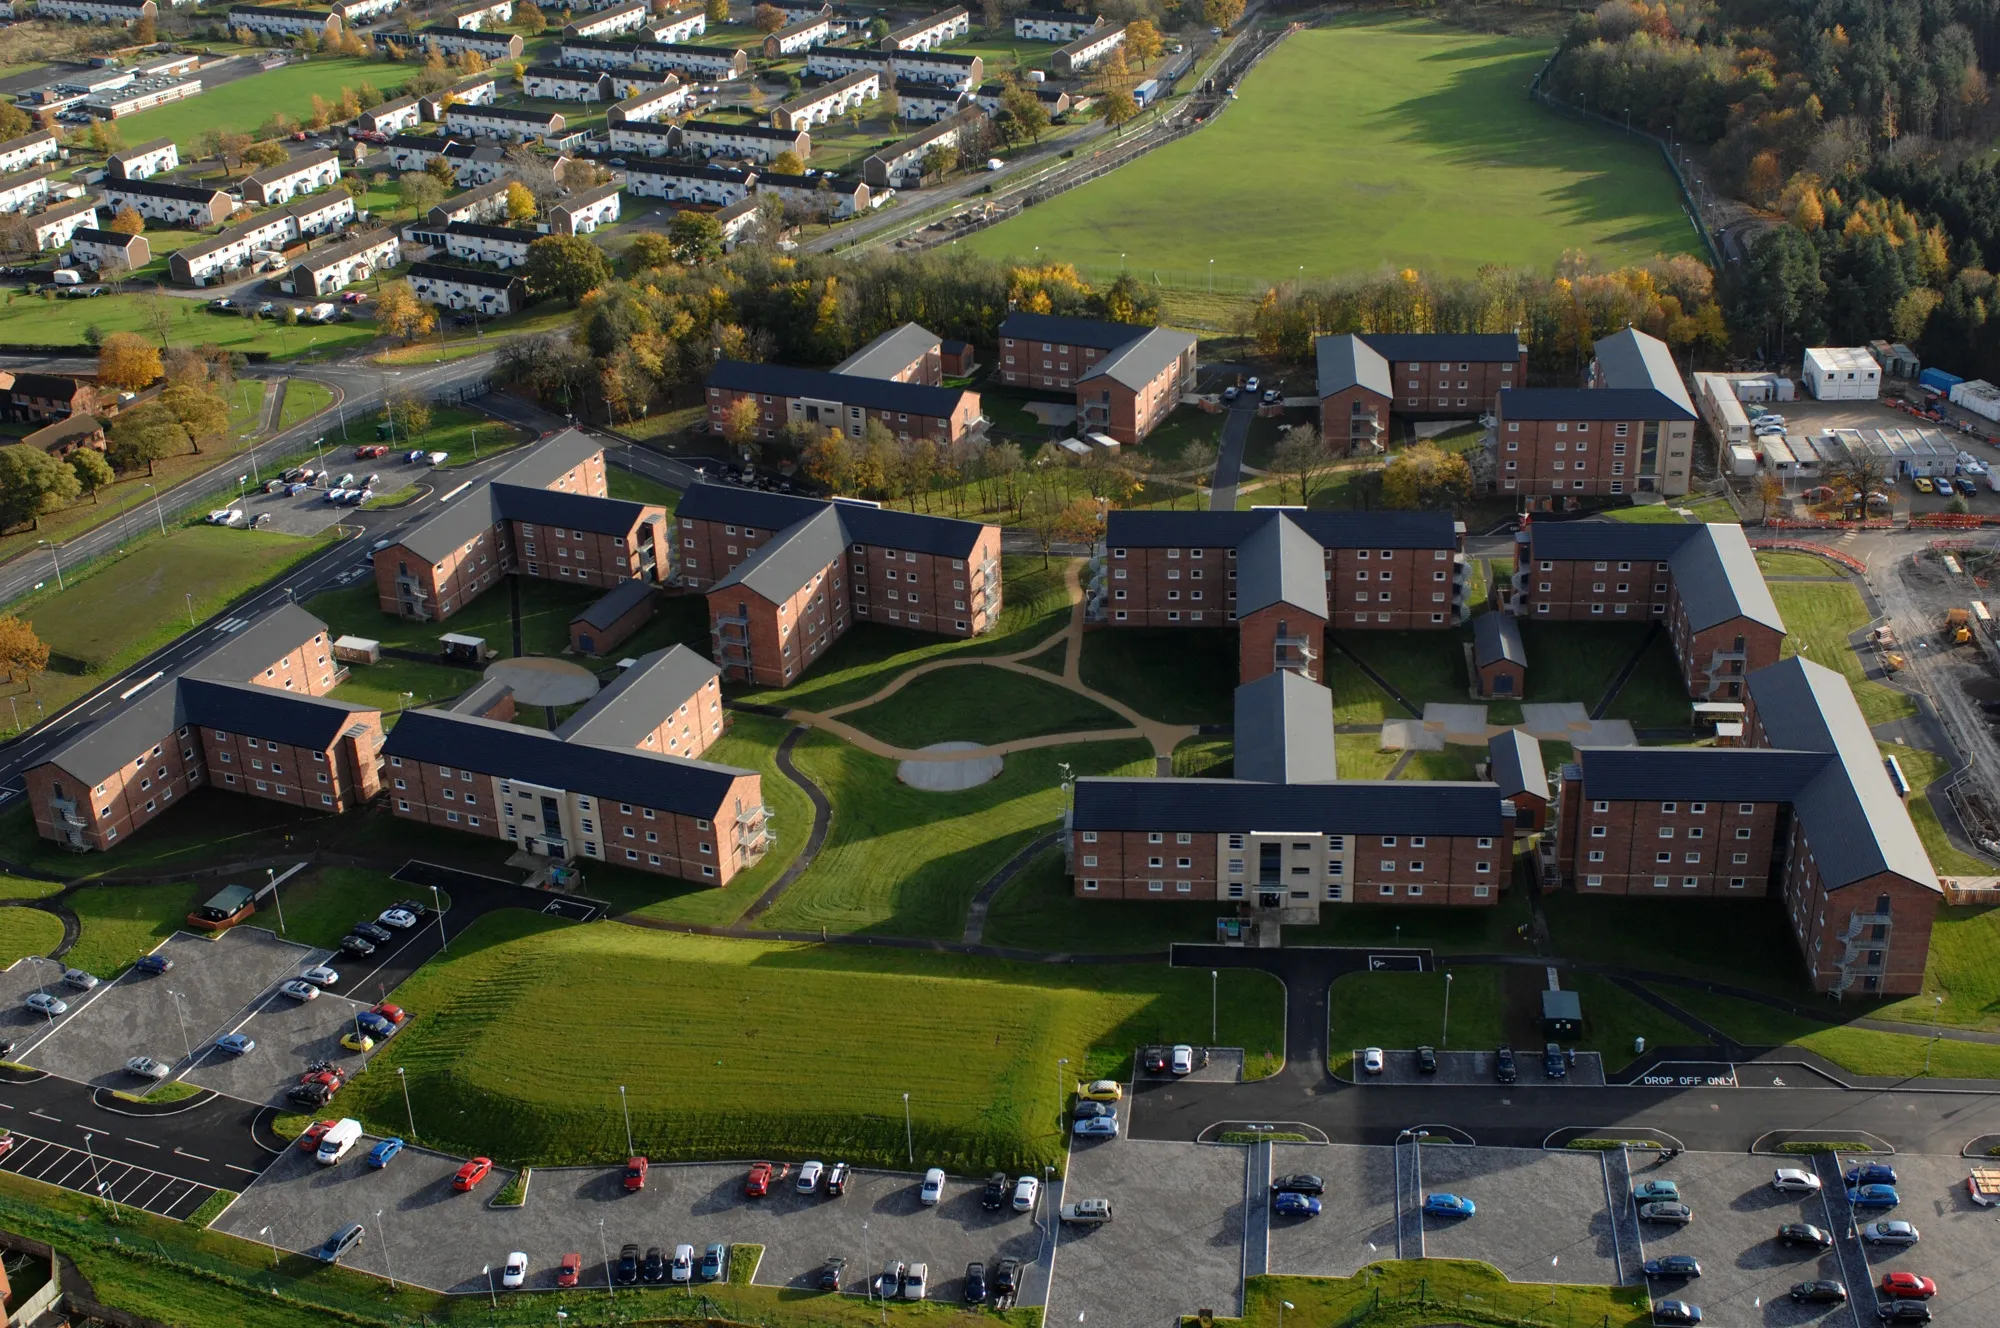 Photo showing: An aerial view of new Single Living Accommodation (SLA) blocks built under Project SLAM at Richmondshire Lines, Catterick Garrison, North Yorkshire.
Organization: MOD
Object Name: image2
Keywords: Ministry of Defence, MoD, Accommodation, Building, Housing, Barracks, Catterick, Garrison
Country: UK